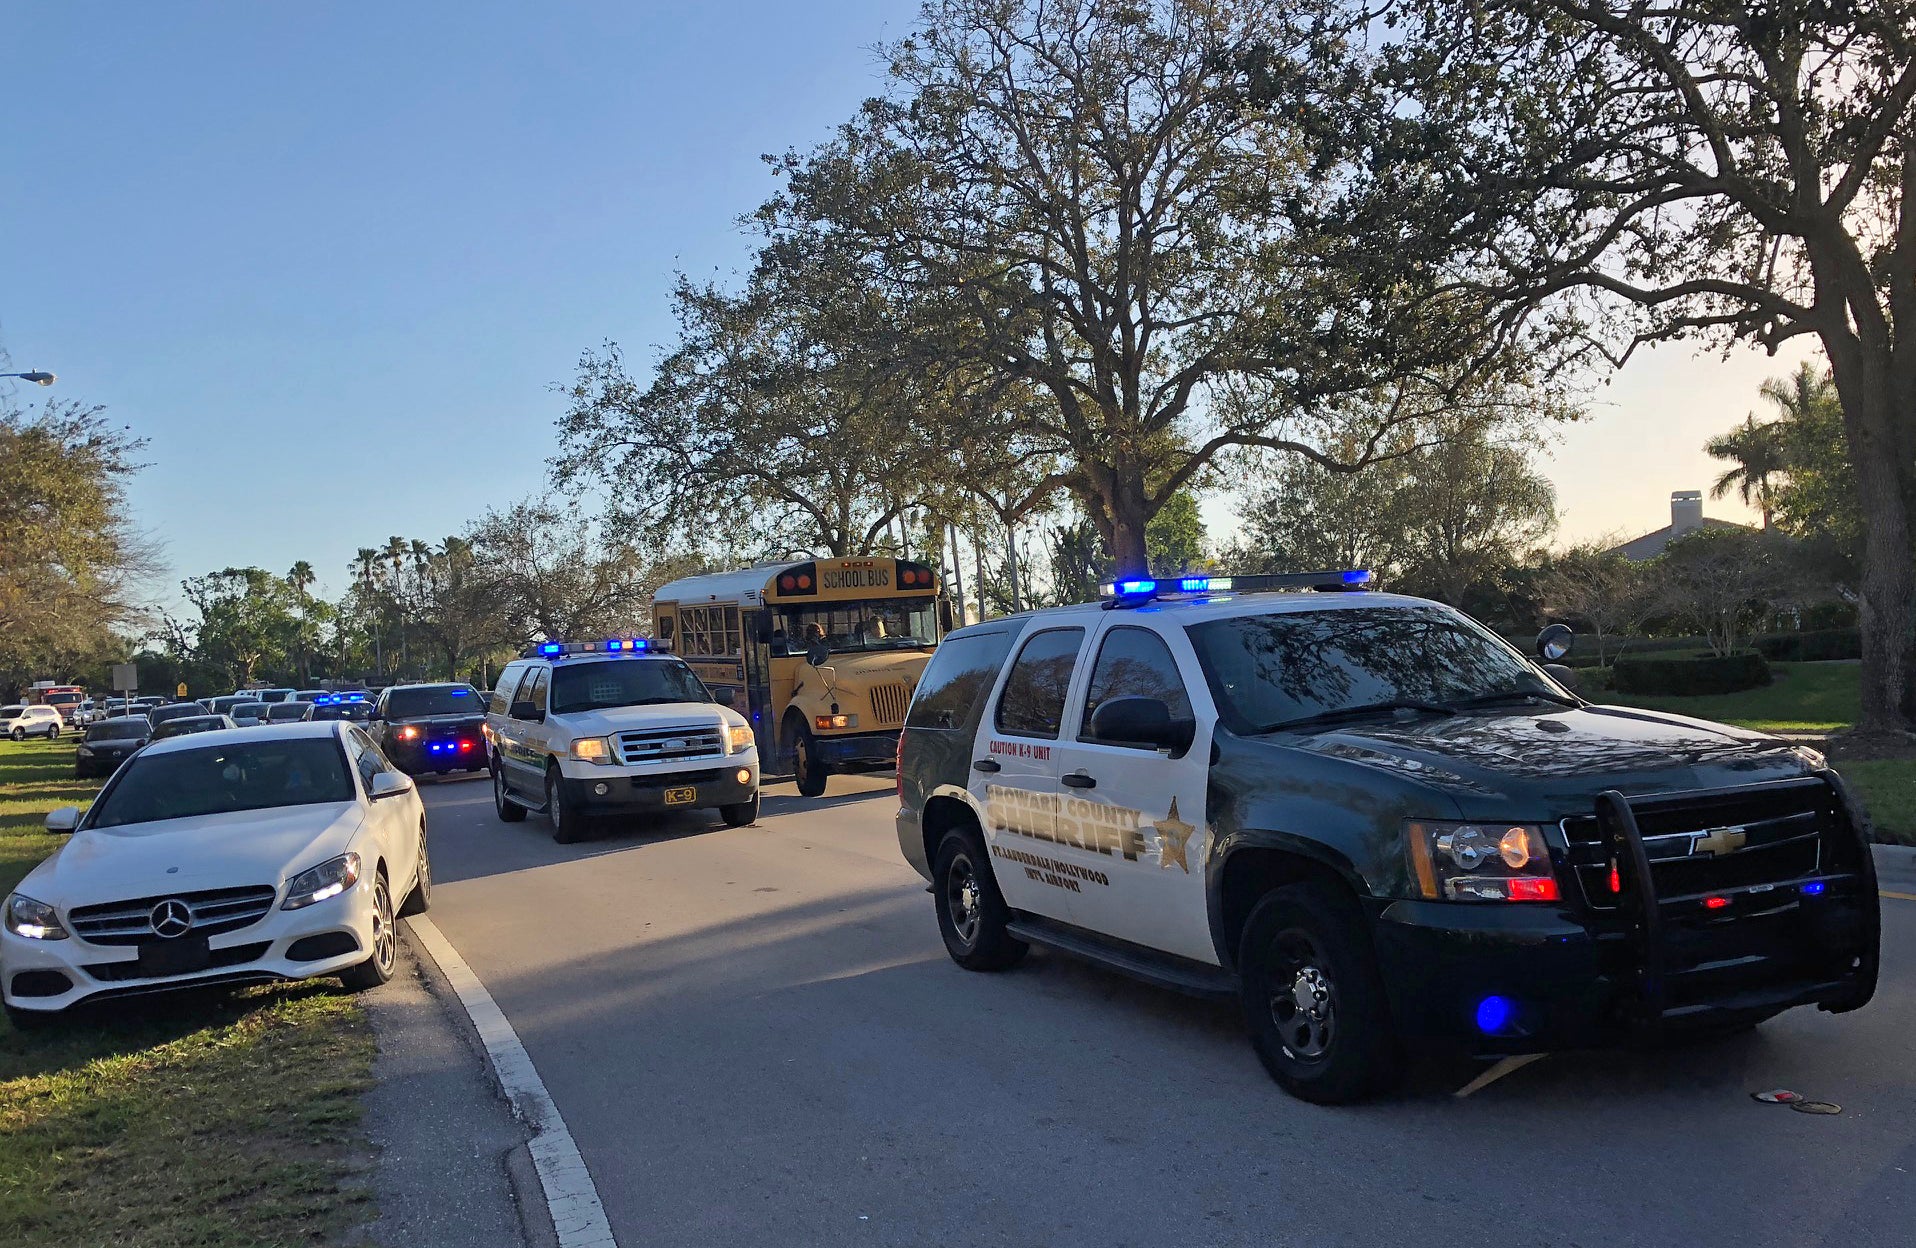 Police and security vehicles are seen at Marjory Stoneman Douglas High School in Parkland, Florida, following a school shooting